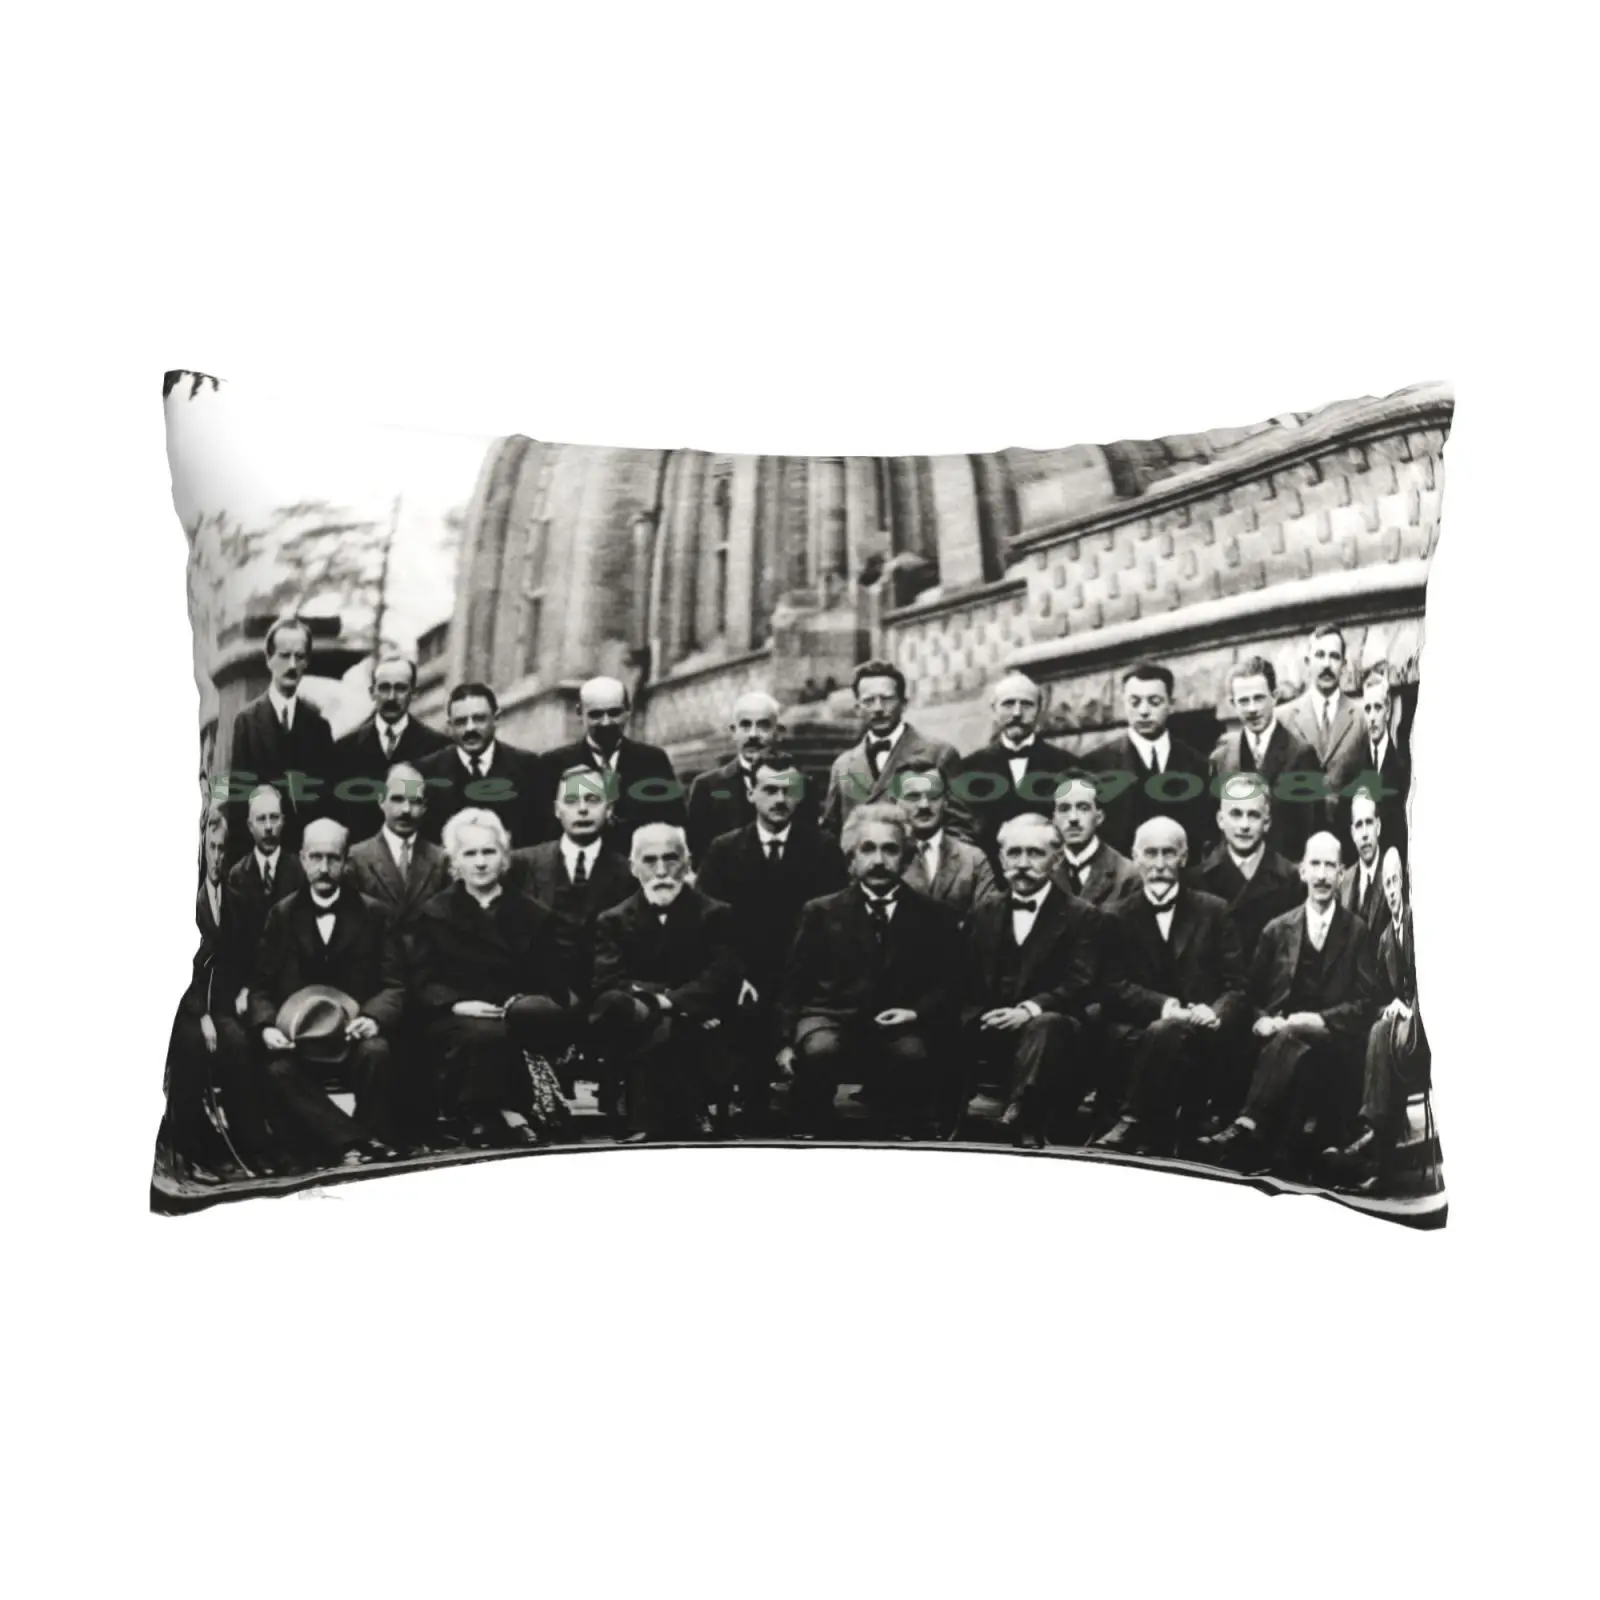 

Fifth Solvay Conference Pillow Case 20x30 50*75 Sofa Bedroom Fifth Solvay Conference Nobel Prize Winners Marie Curie Albert